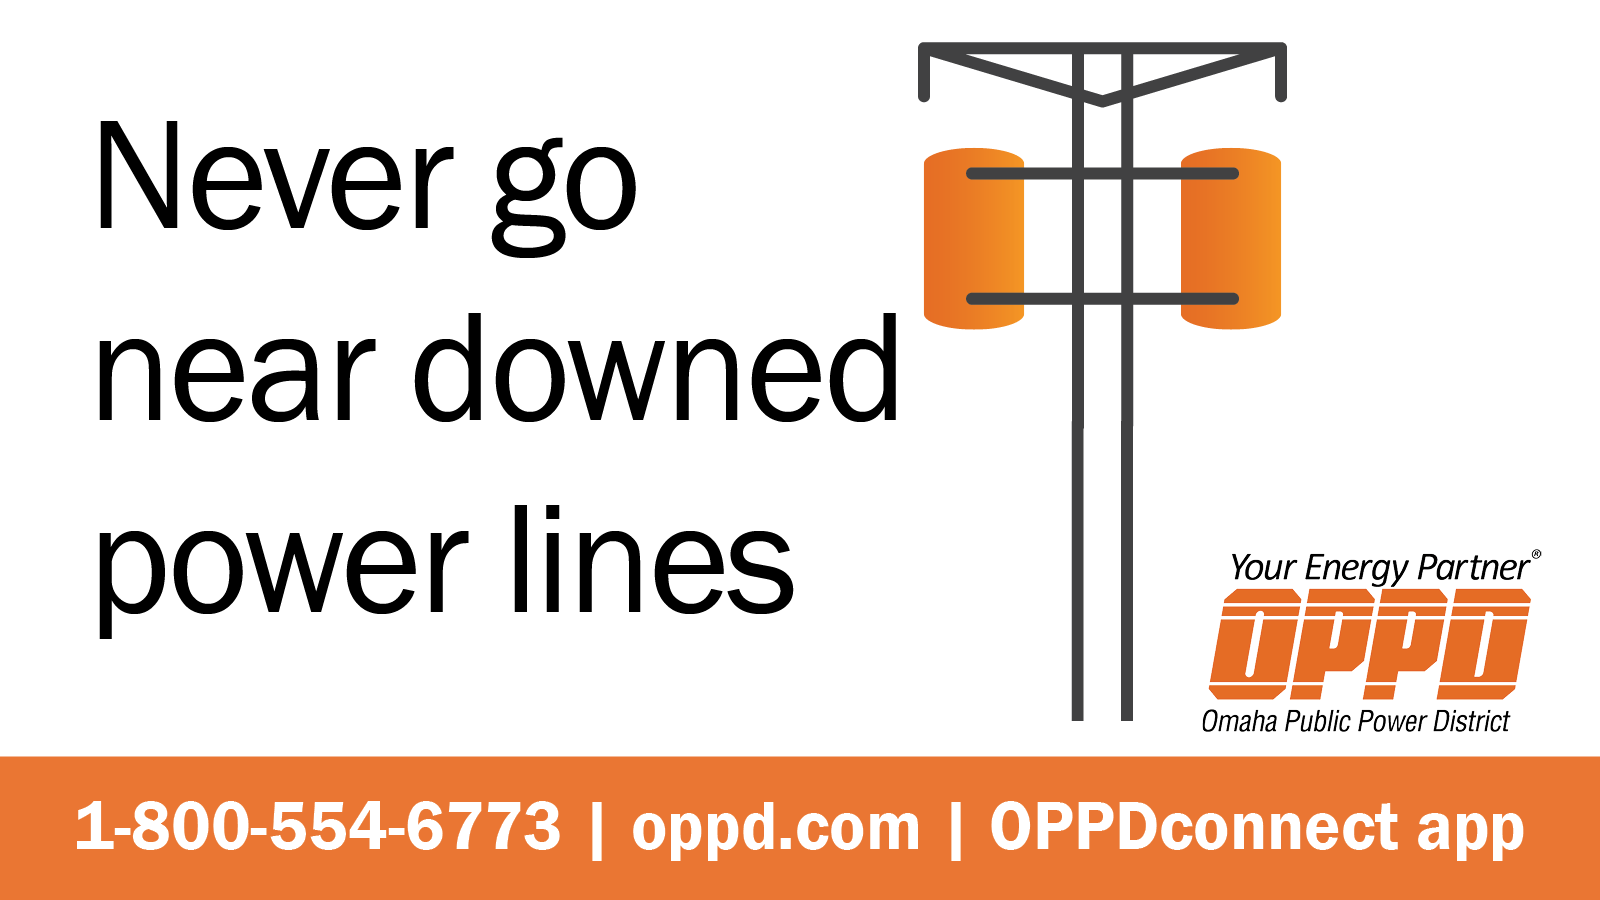 Never go near downed power lines_rectangle